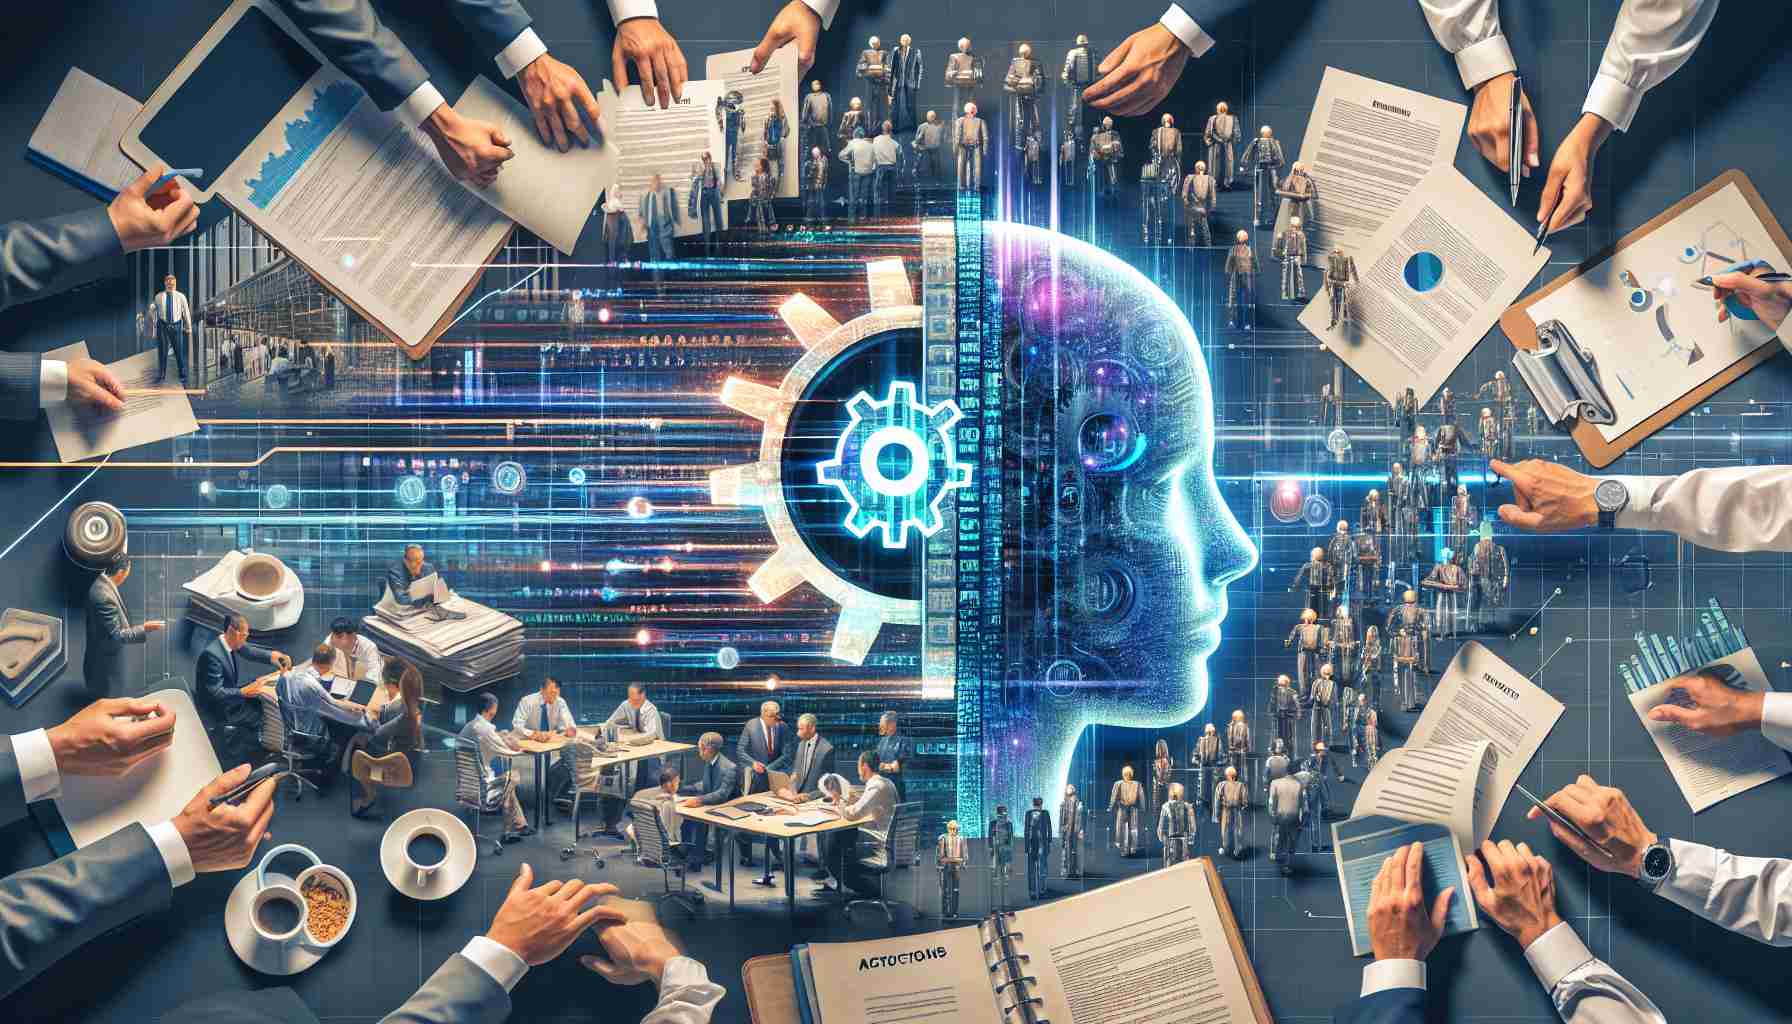 Push for AI Legislation Accelerates to Establish Industry Support and Ethical Guidelines